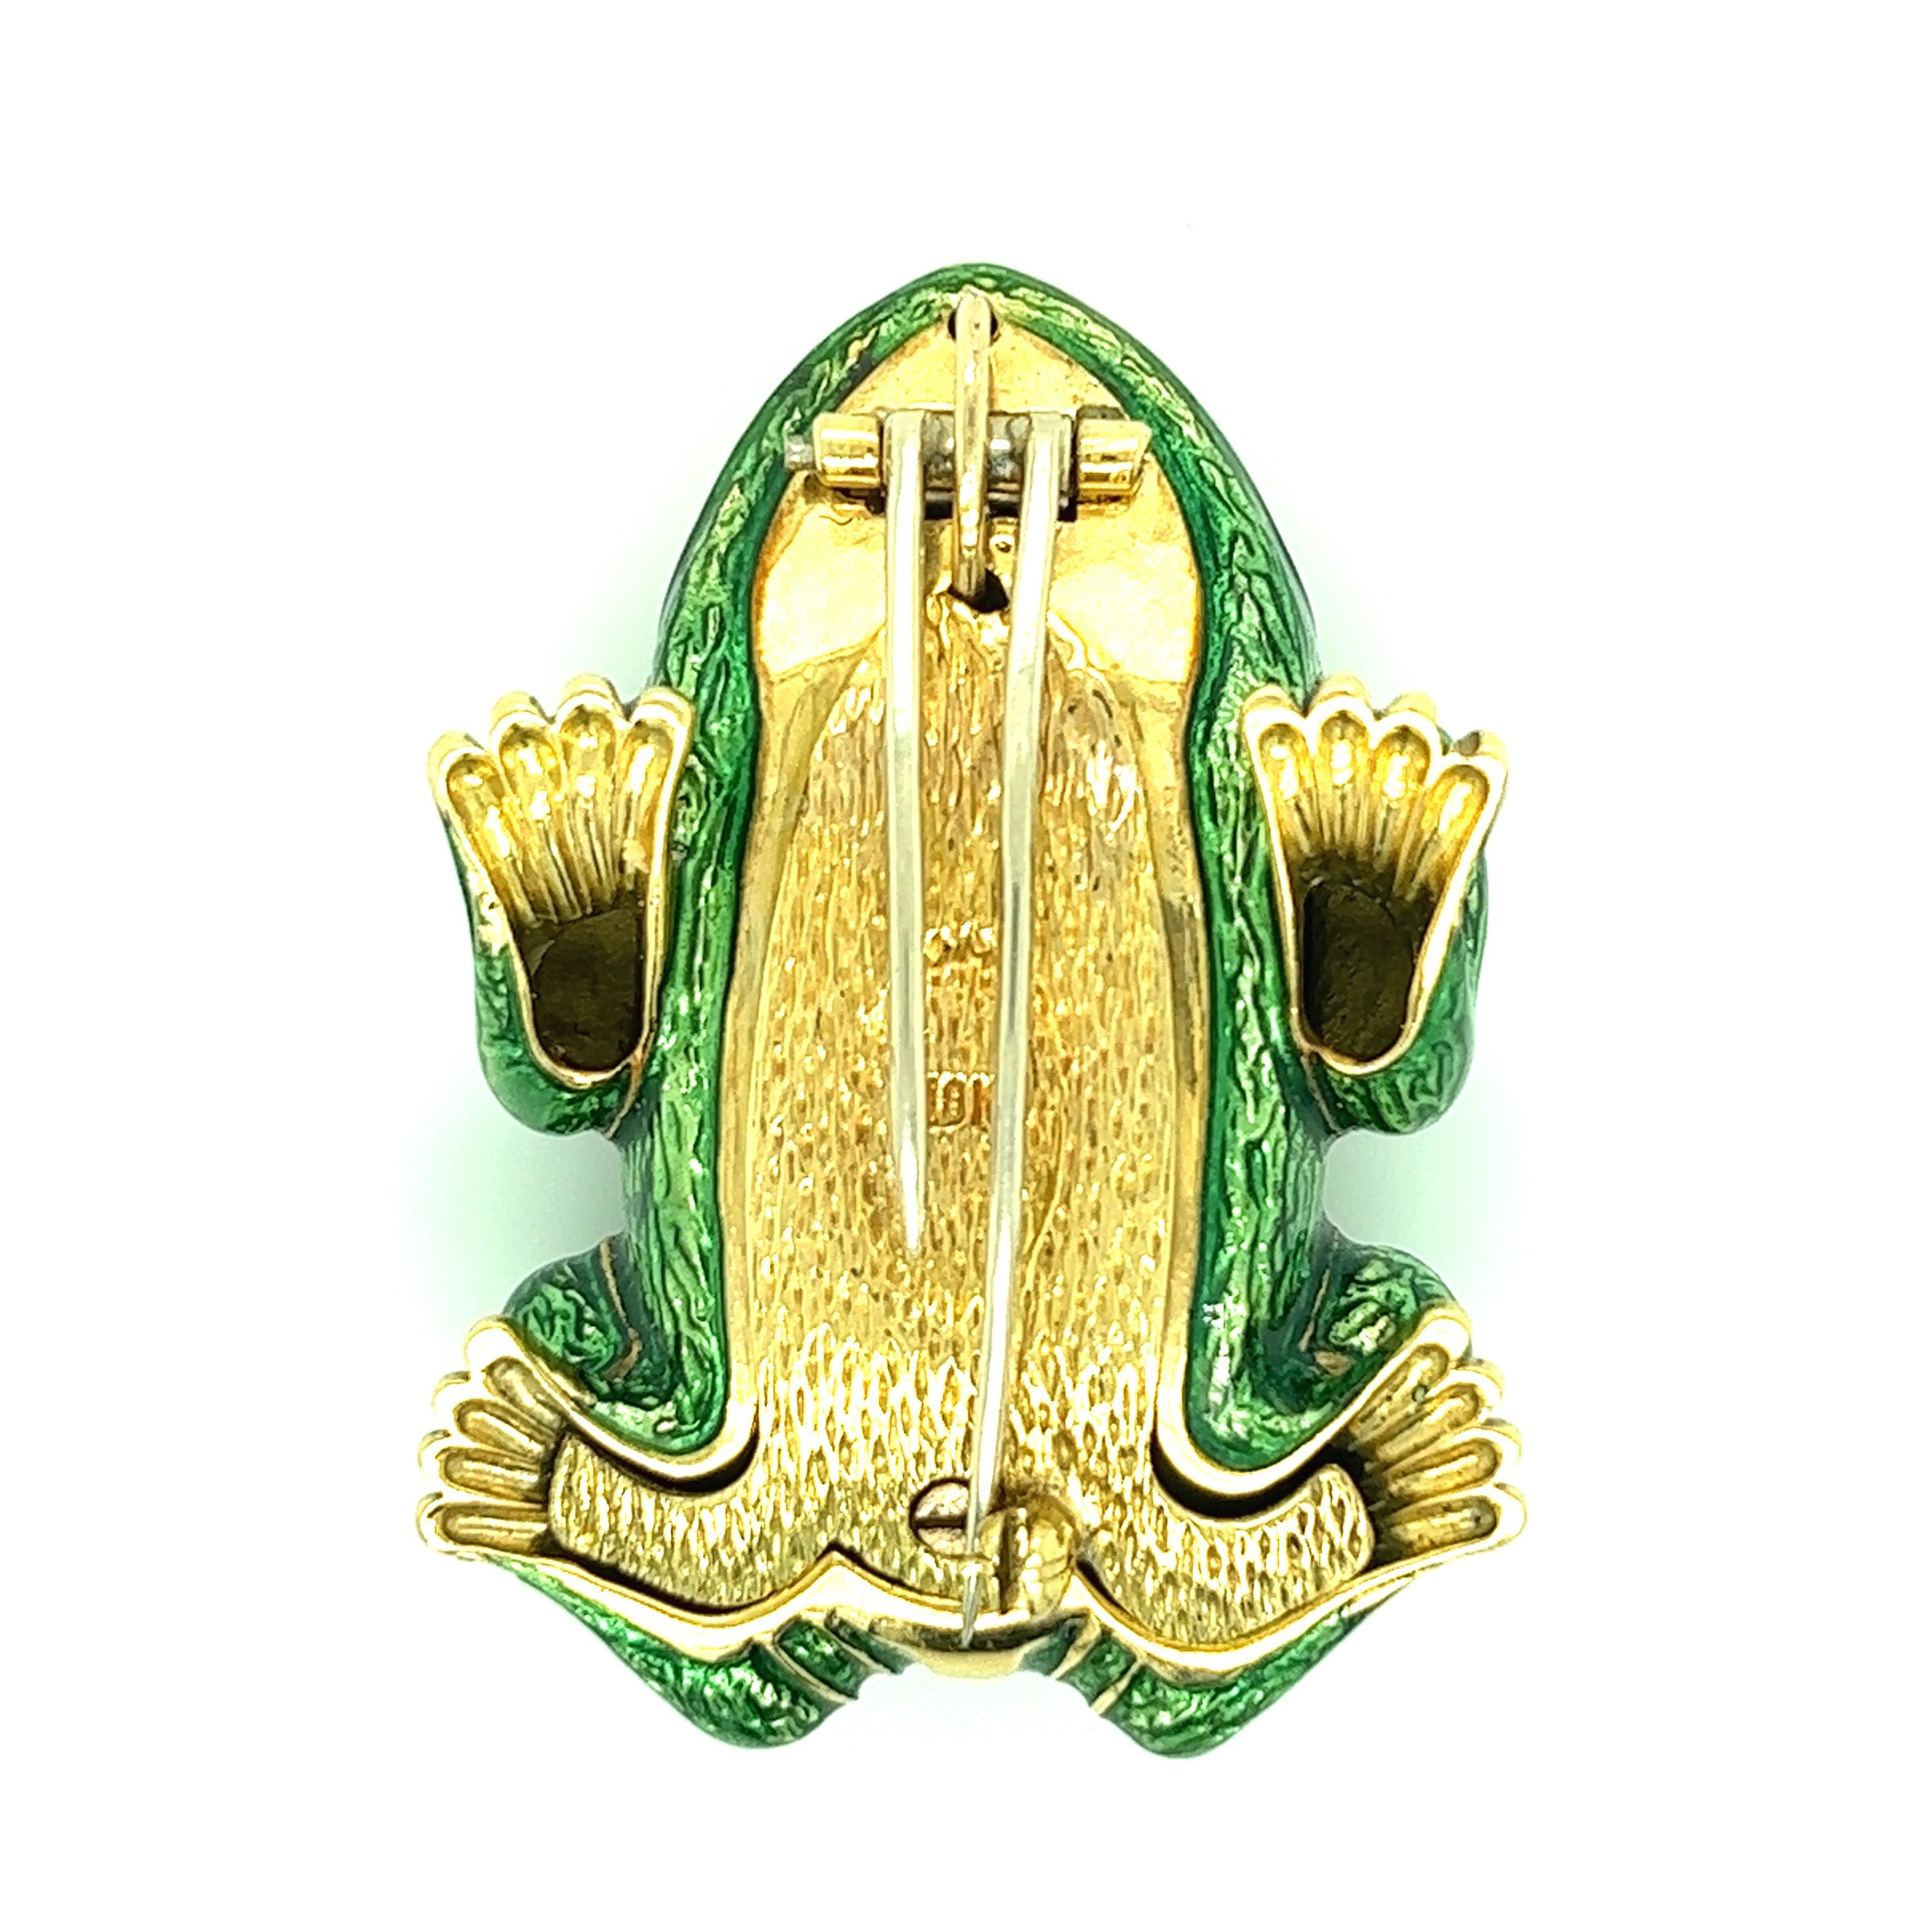 A unique brooch that features a frog made out of green enamel set on 18 karat yellow gold as well as oval rubies for eyes. Marked: 18k. Width: 1.25 inches. Length: 1.75 inches. Total weight: 38.8 grams. 